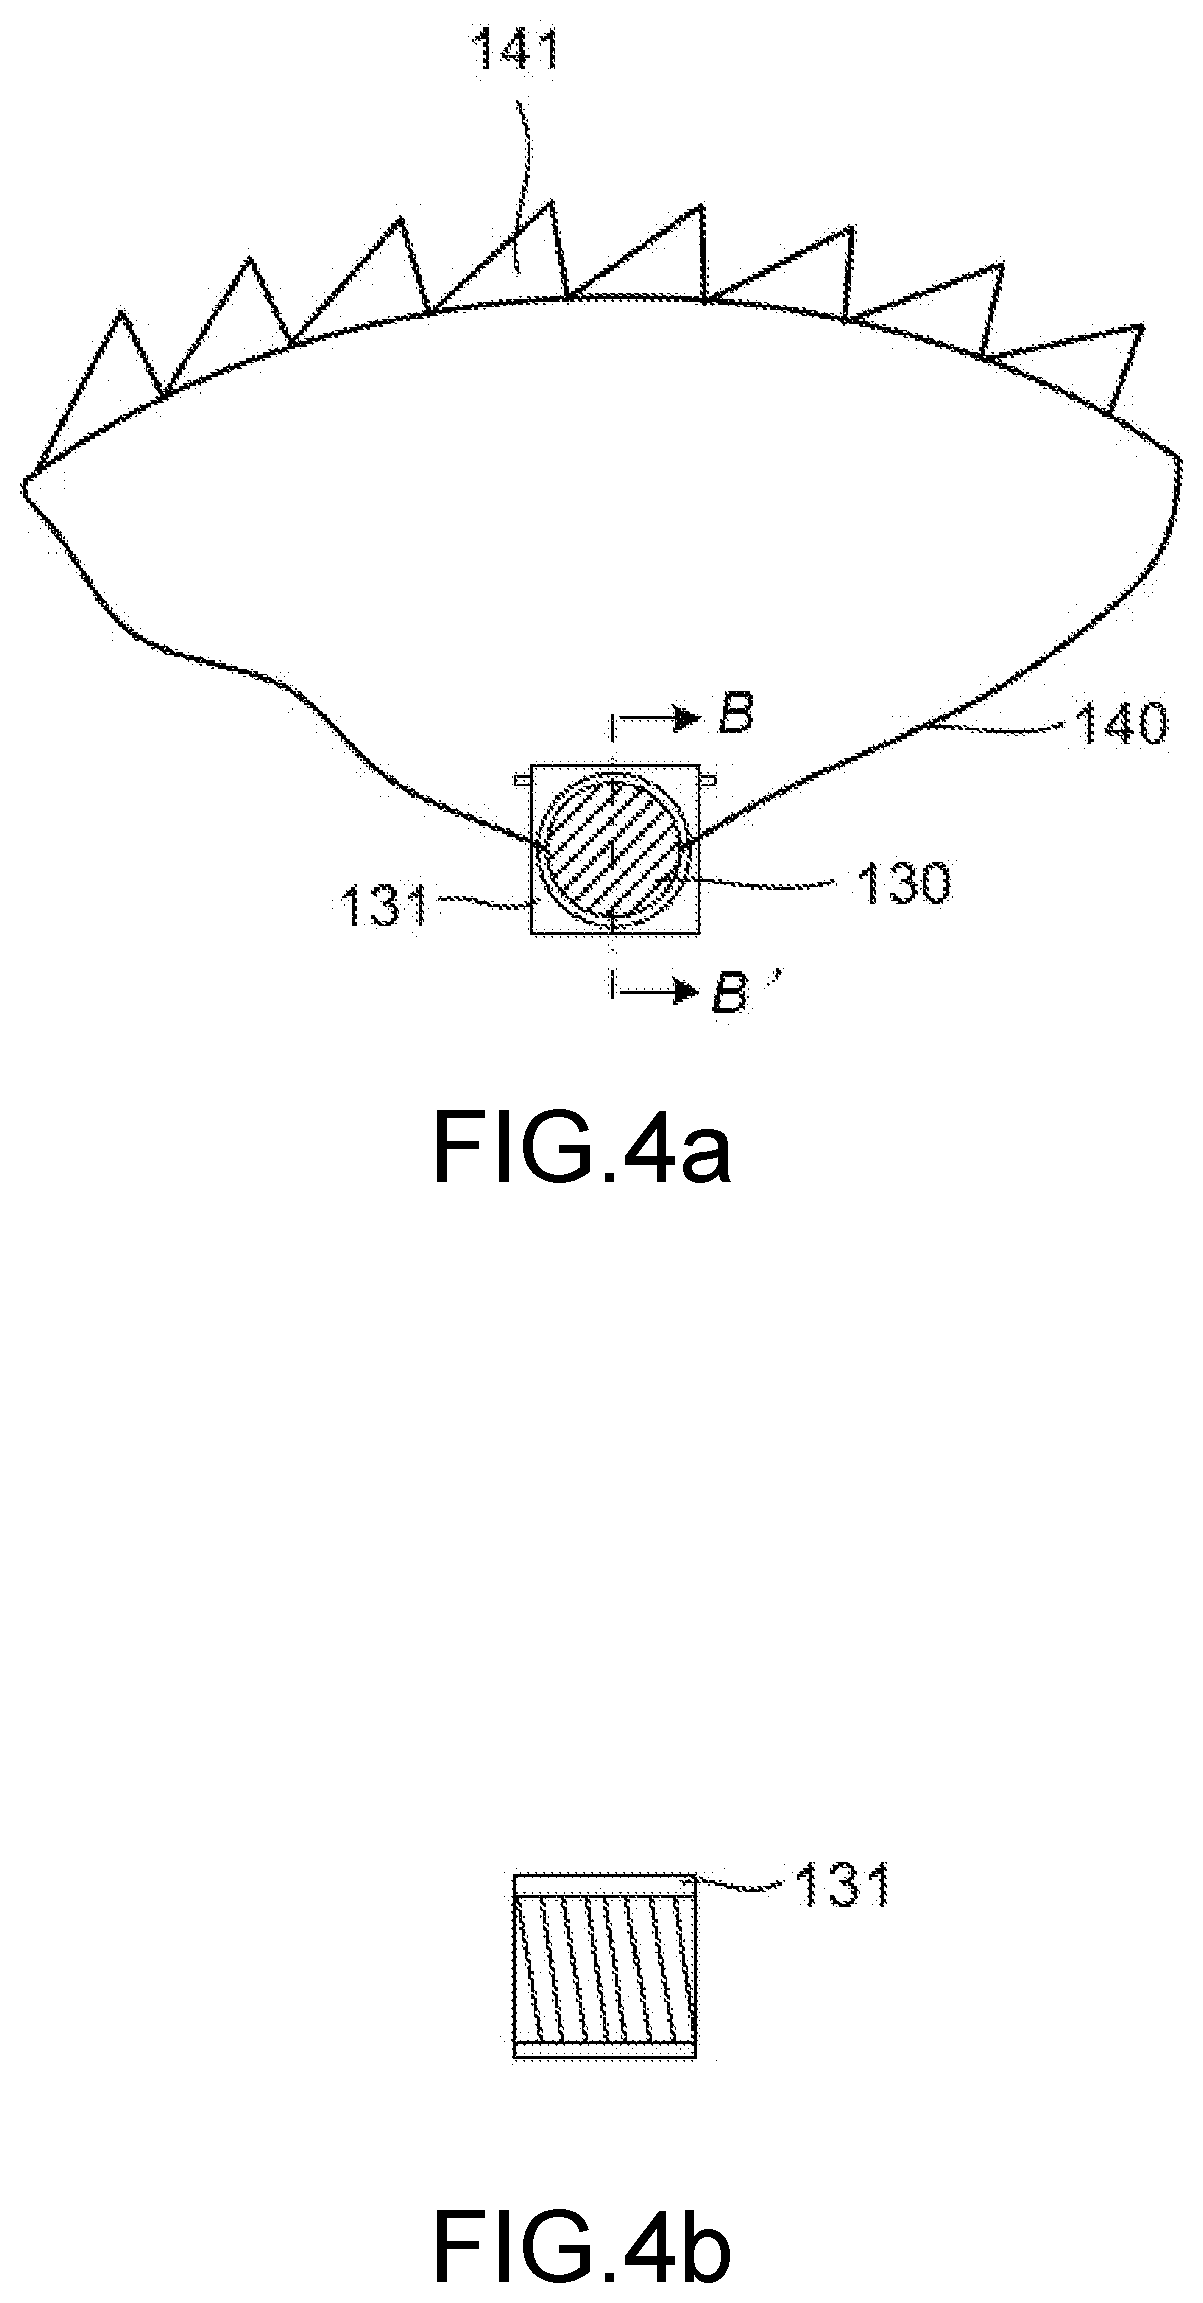 Patch-type drug infusion device